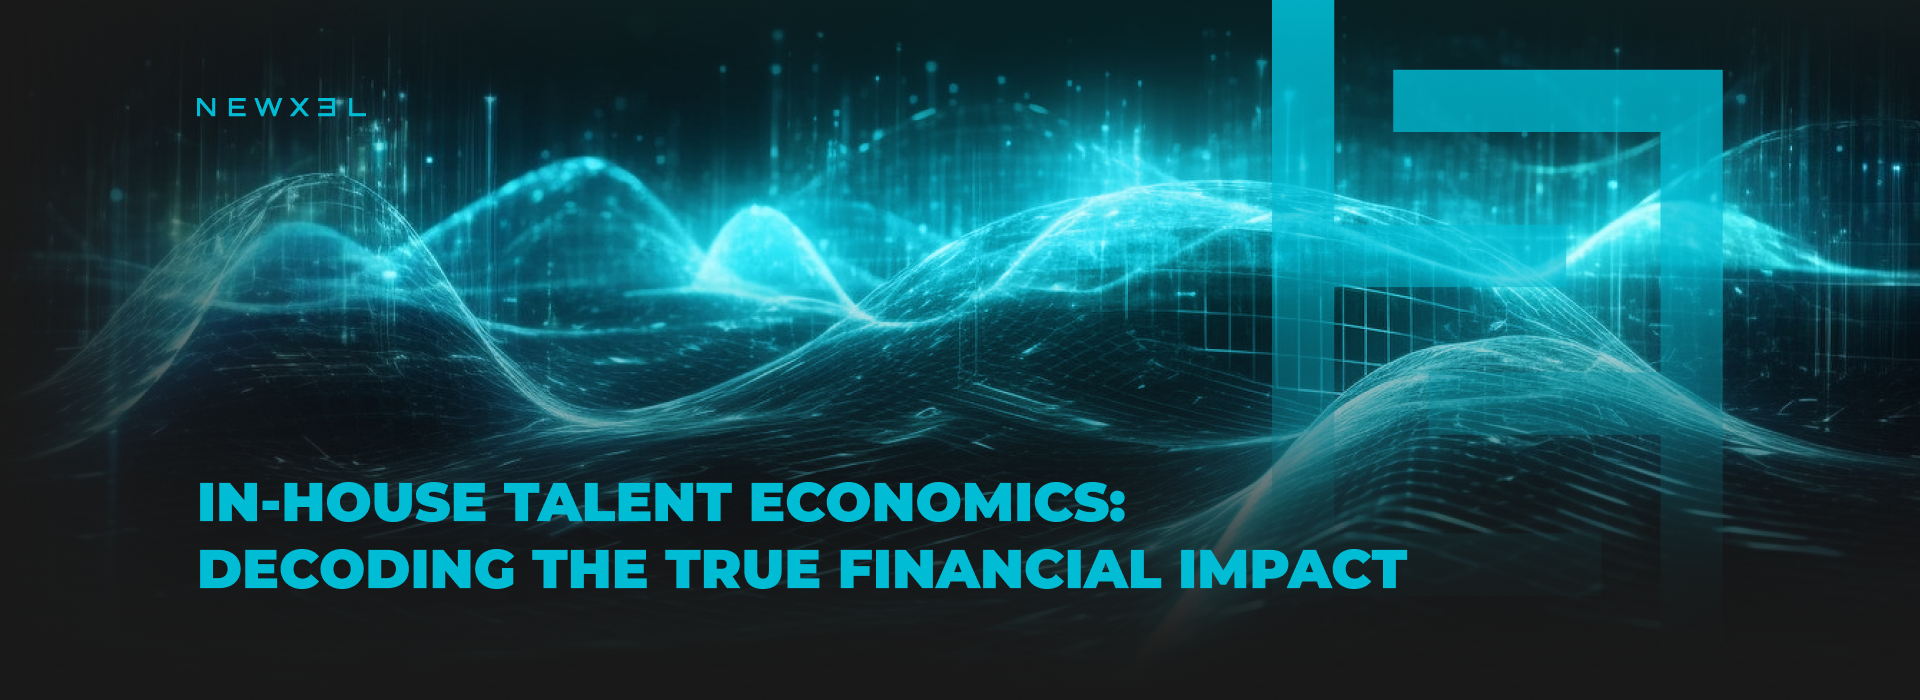 Newxel Report “In-House Talent Economics: Decoding the True Financial Impact. 2023 Operations Team Cost”